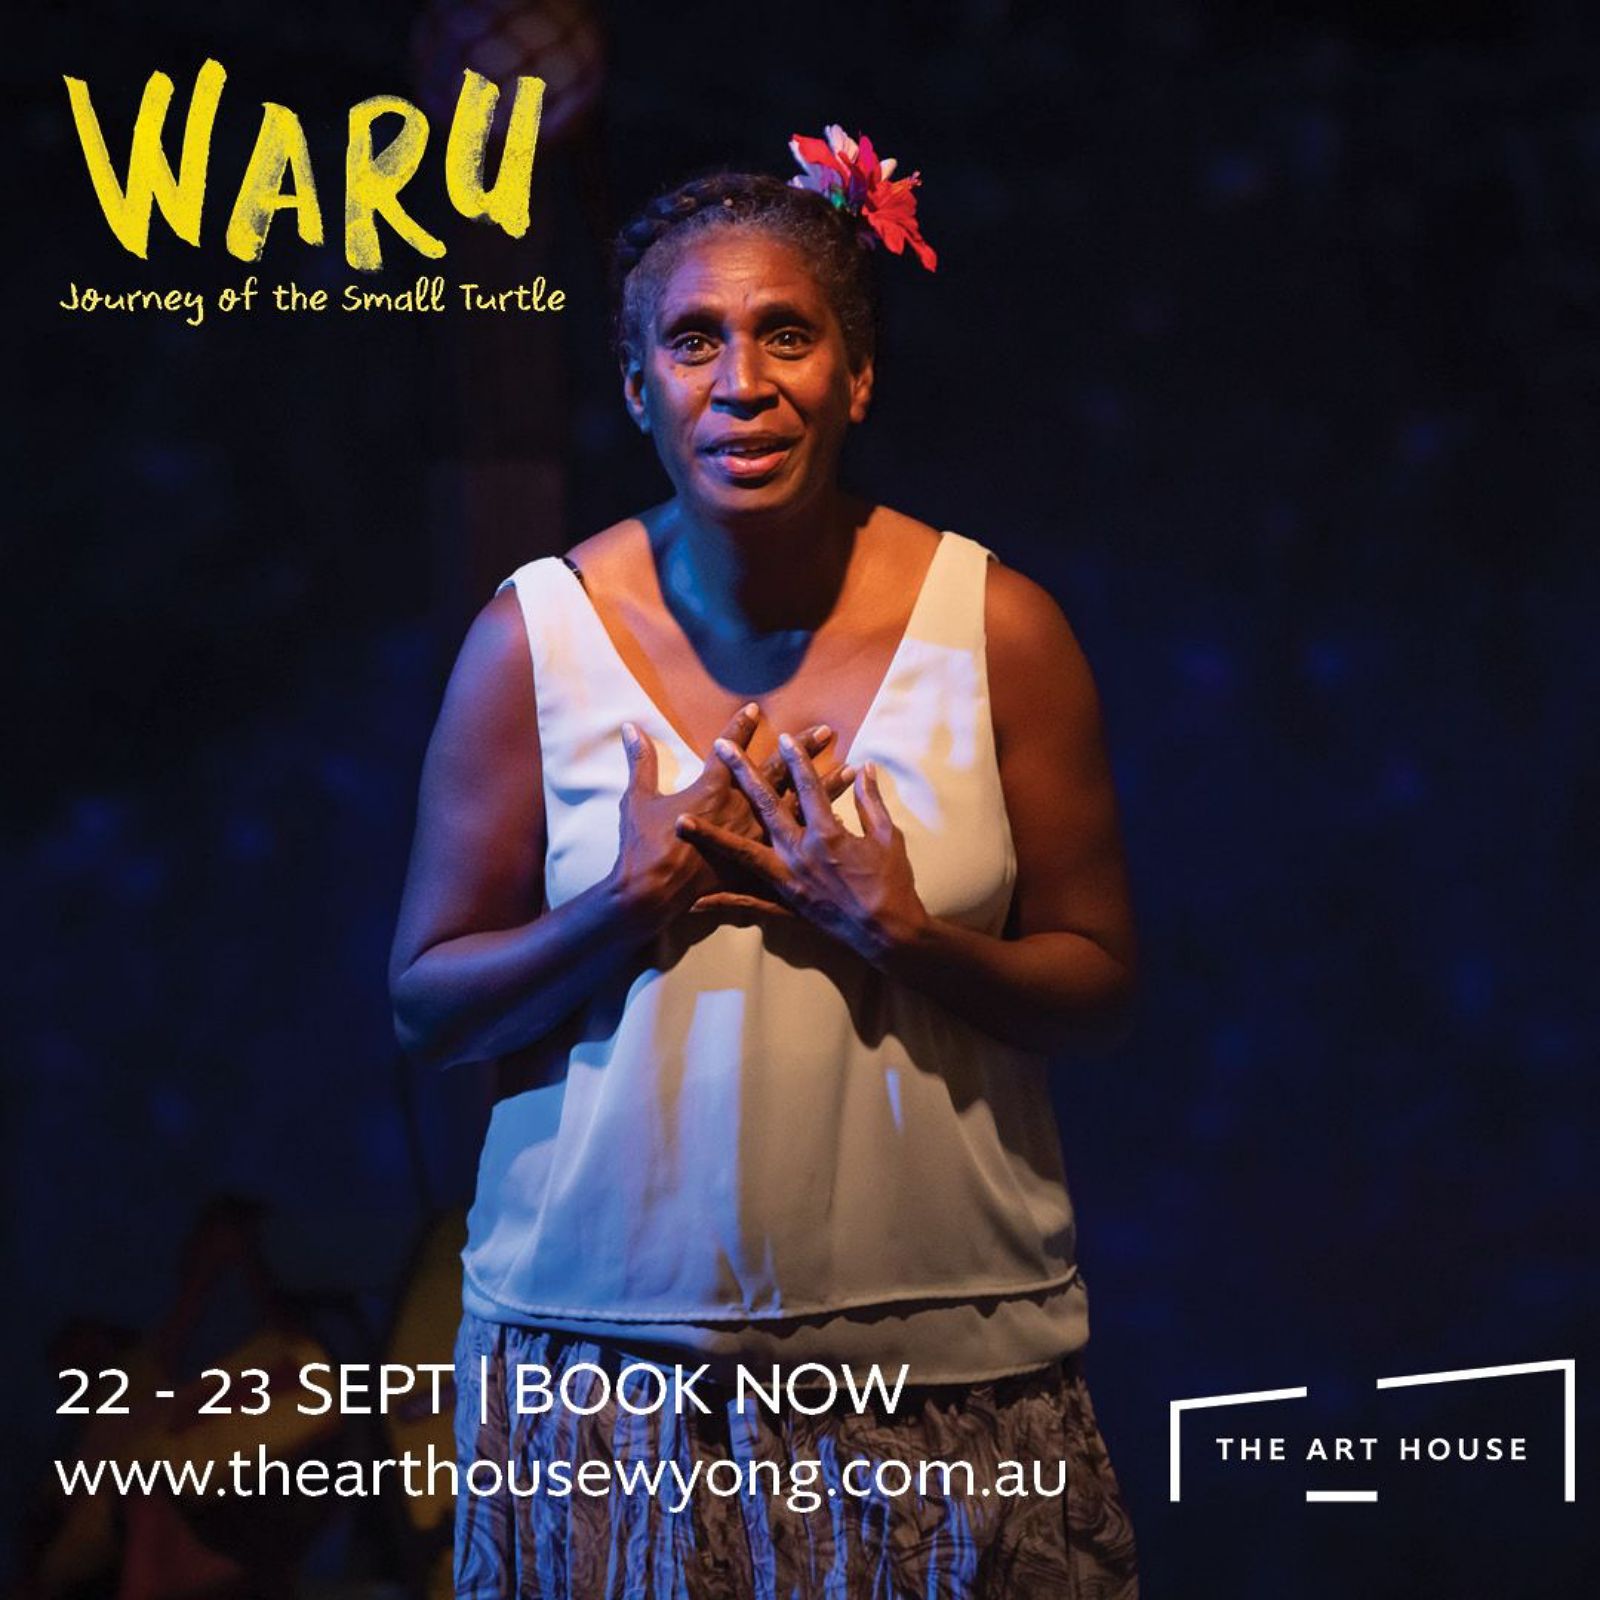 The Art House Wyong Waru - Journey of the Small Turtle